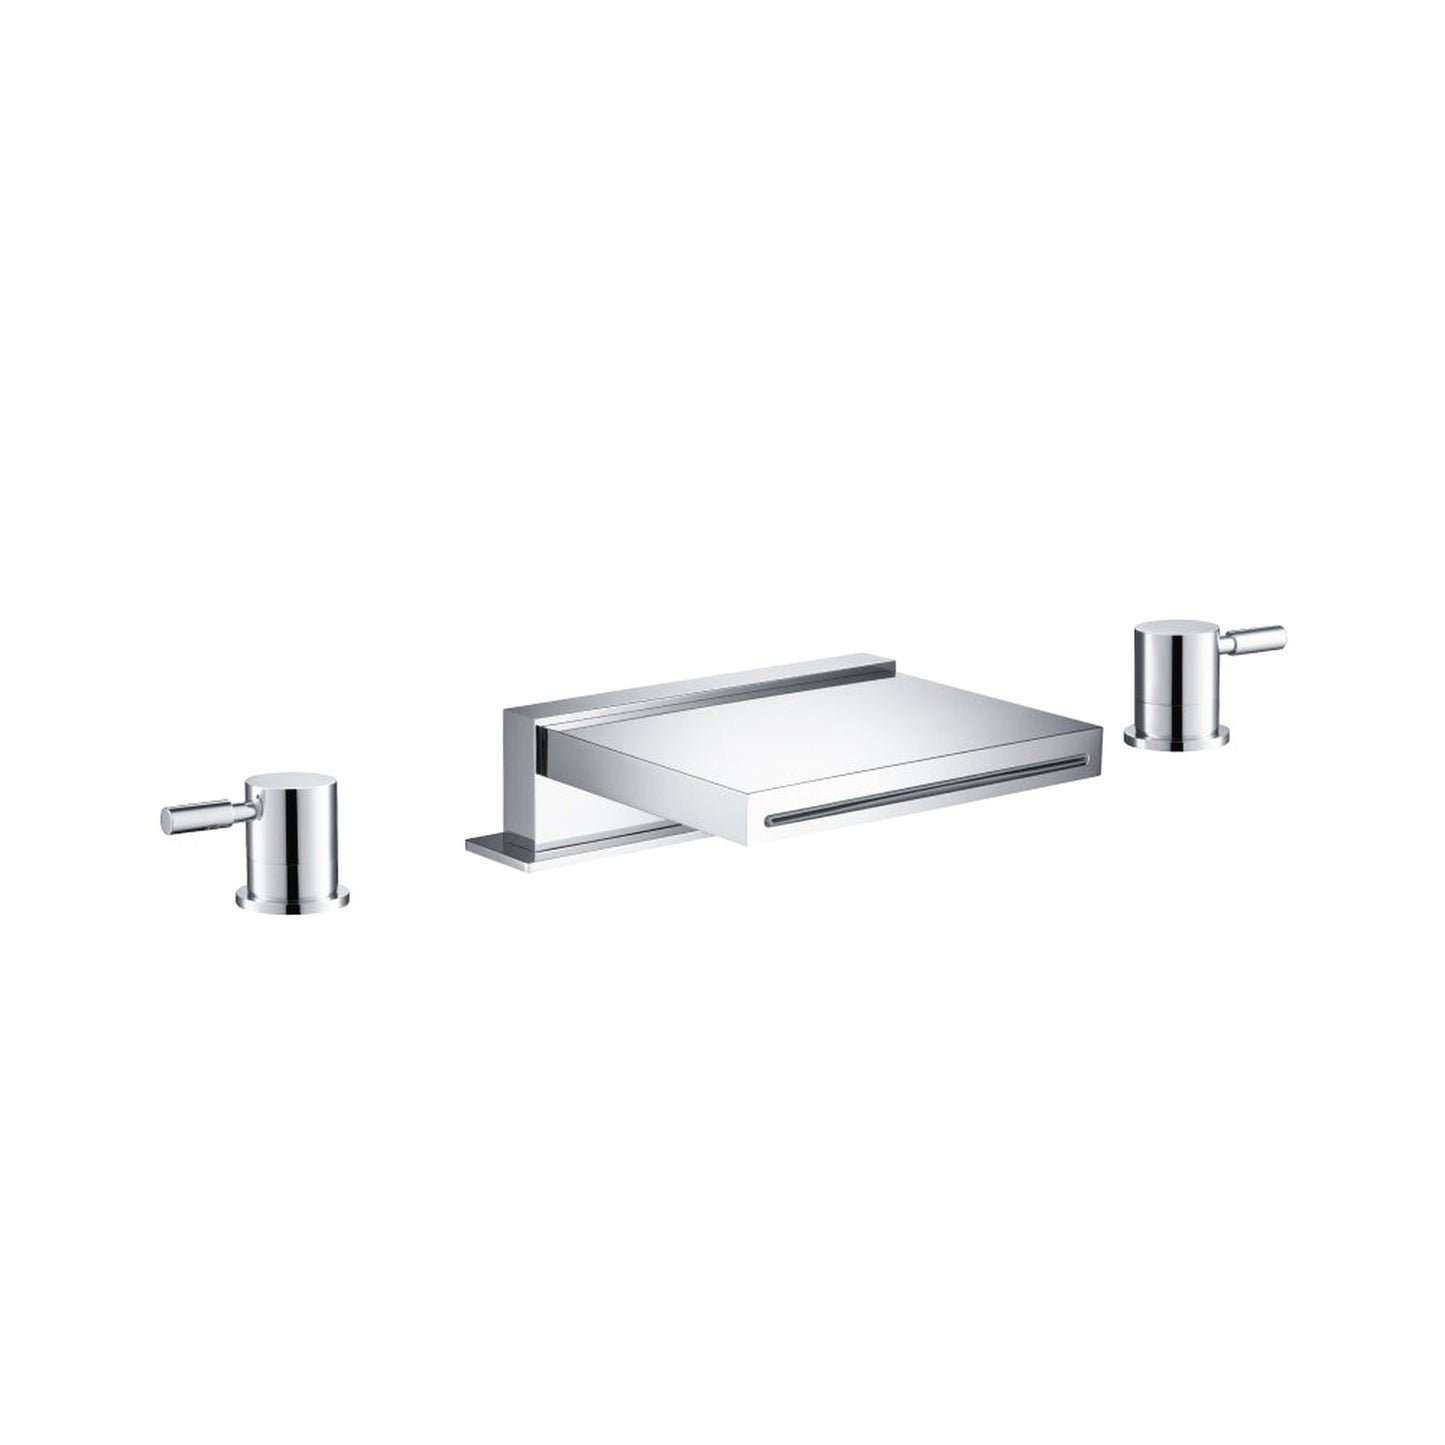 Isenberg Serie 100 18" Three-Hole Brushed Nickel PVD Deck-Mounted Cascade / Sheet Flow Waterfall Roman Bathtub Faucet With Valve Set